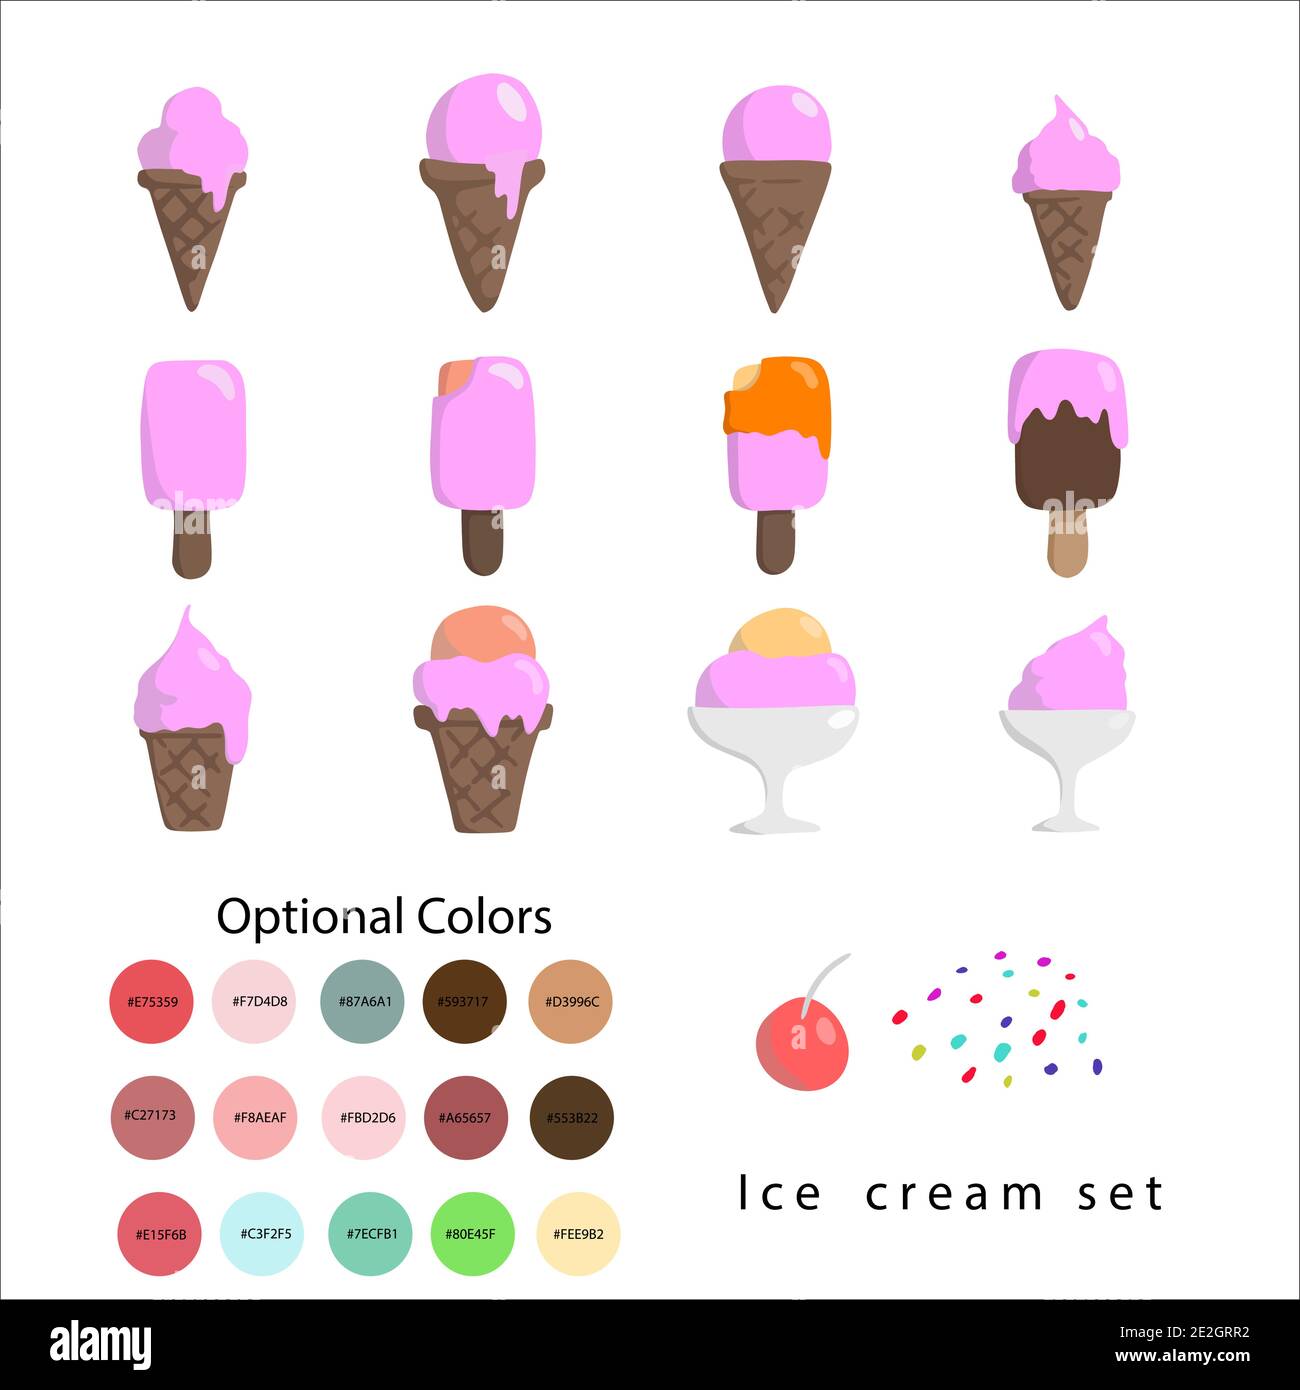 flat design colorful  ice cream set with optional color codes isolated on white background. Editable artwork and layers separated. Stock Vector